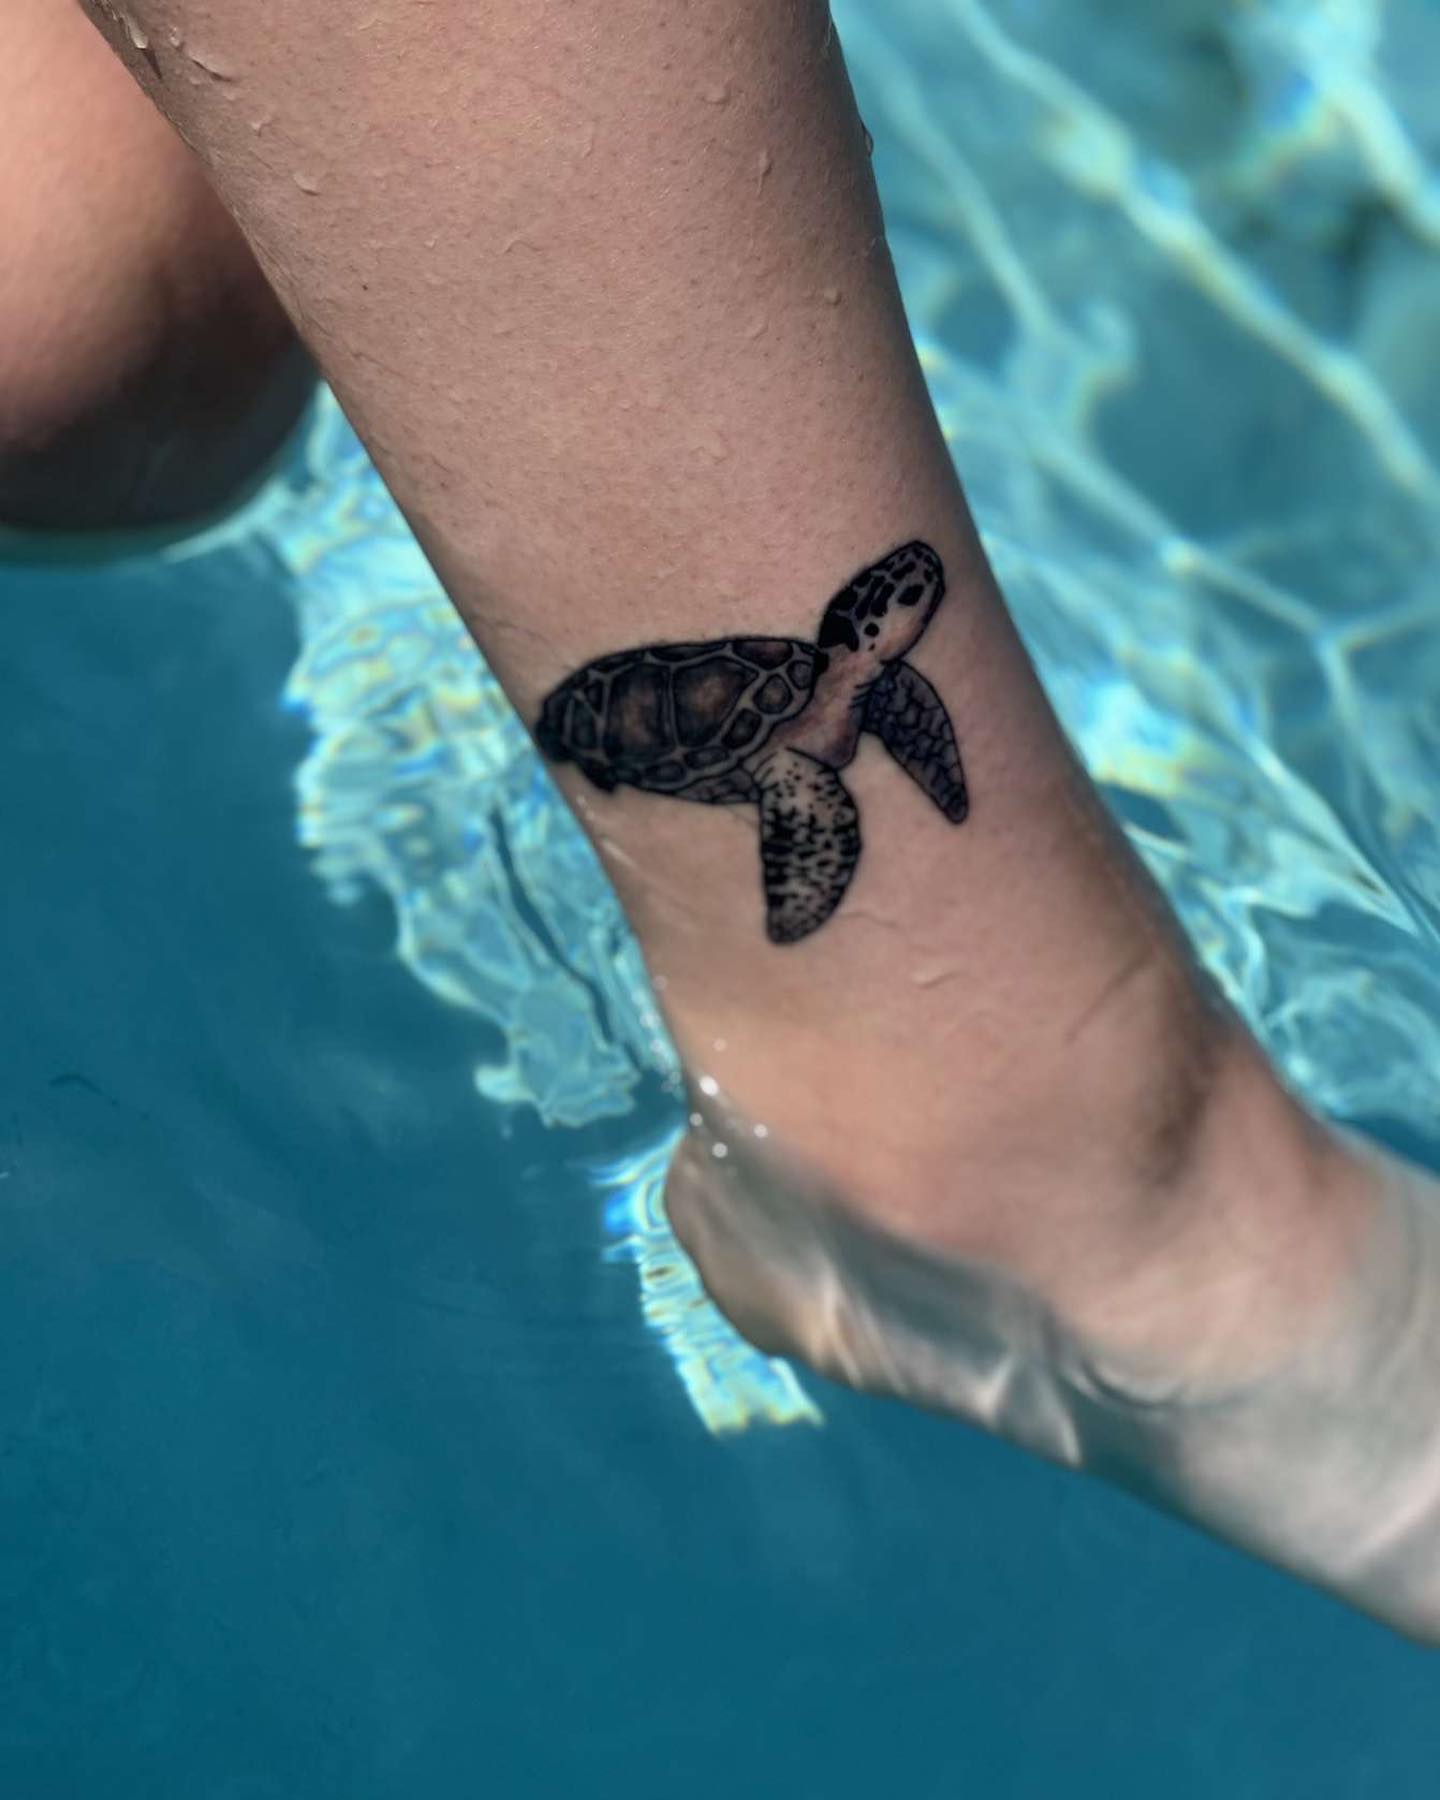 Do you like the sea and its creatures? If so, why not show off this cute little black turtle idea? It will symbolize your inner peace and will show how you connect with the depths of the ocean & animals in general.